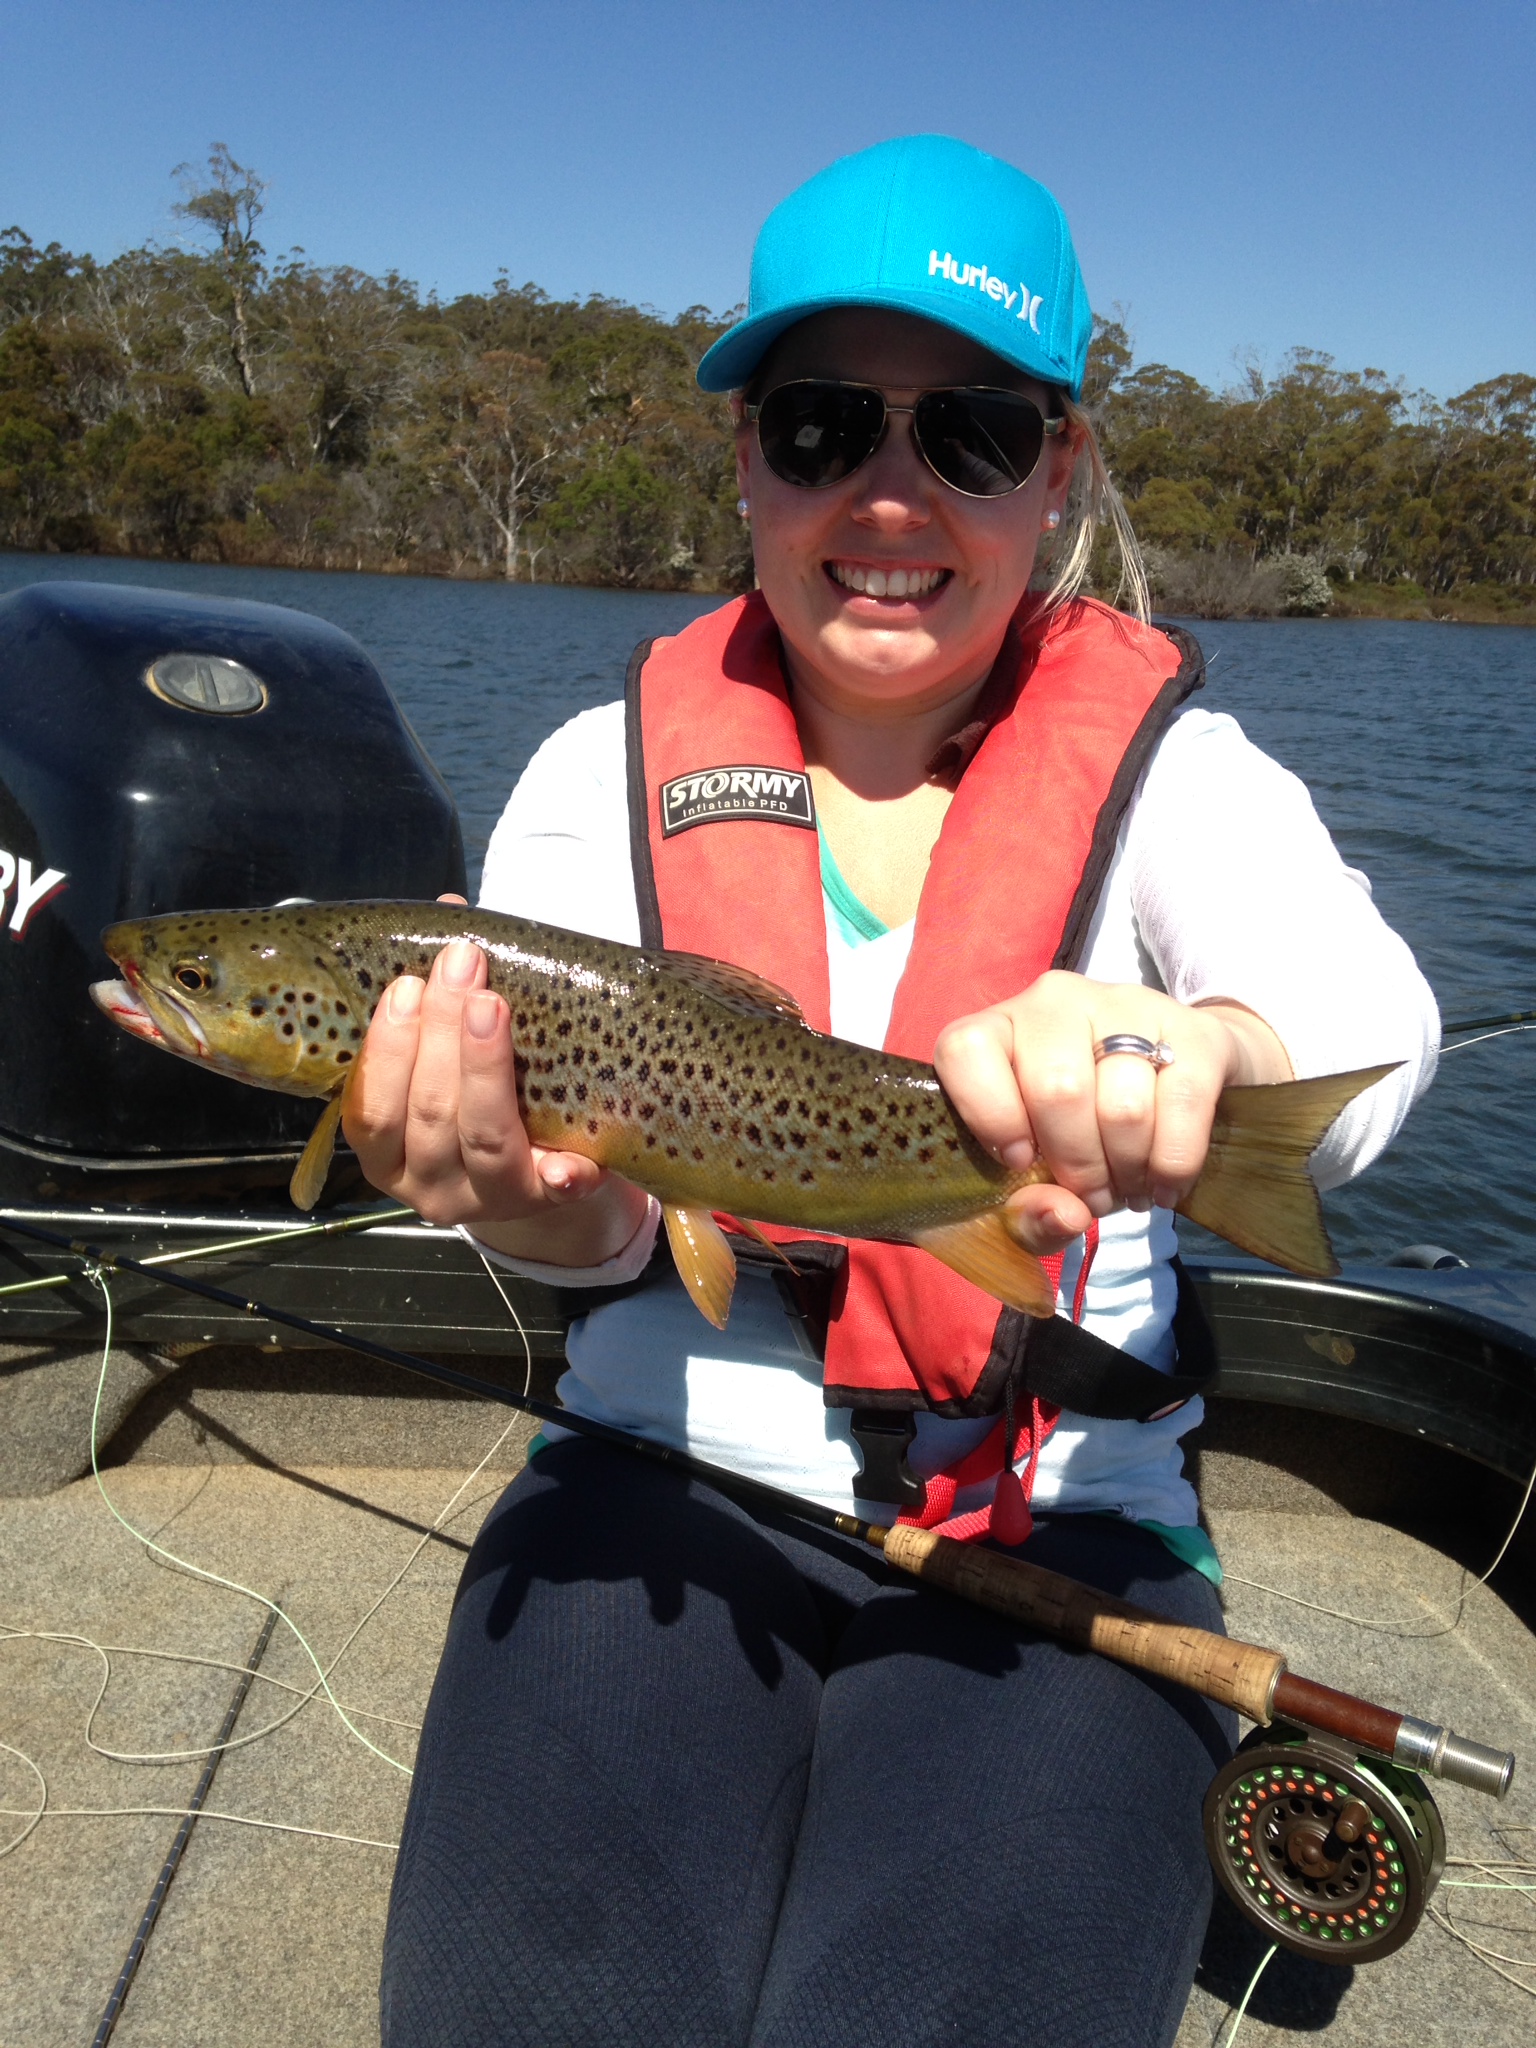 Sarah Wearne didn't take long to land her first trout on the fly. A natural!